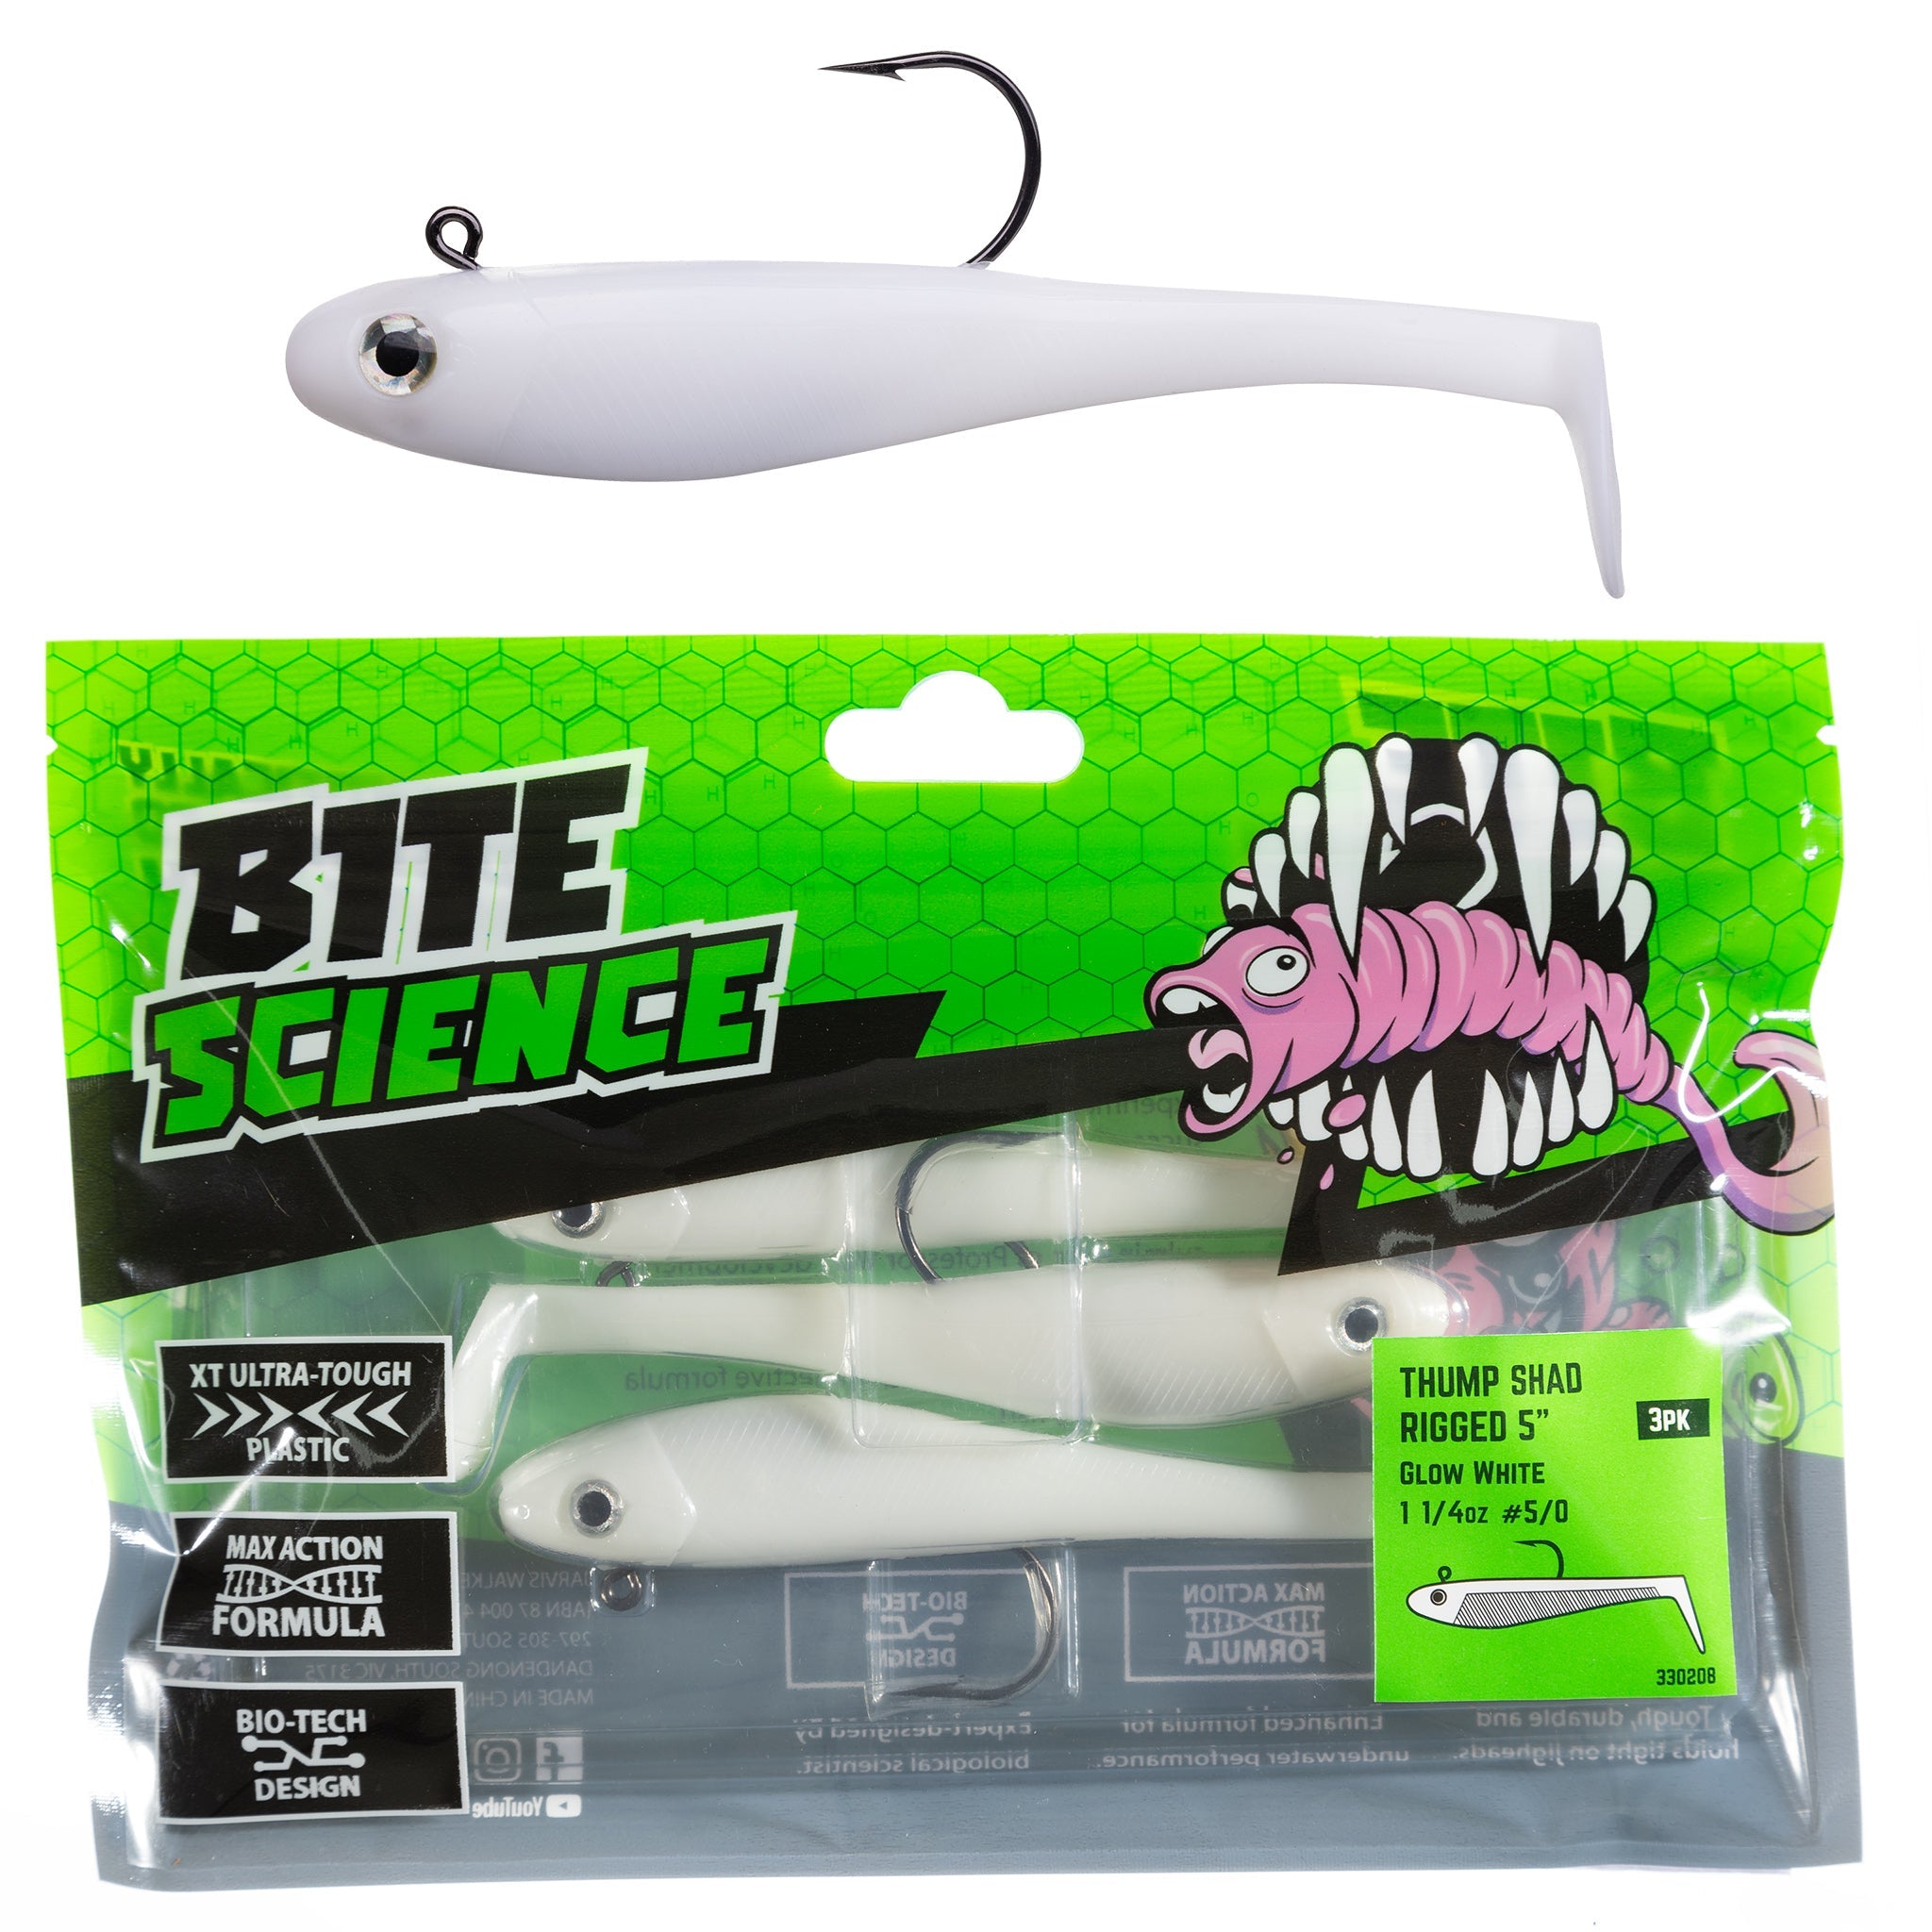 Bite Science Thump Shad Rigged Soft Plastic Lures – Jarvis Walker